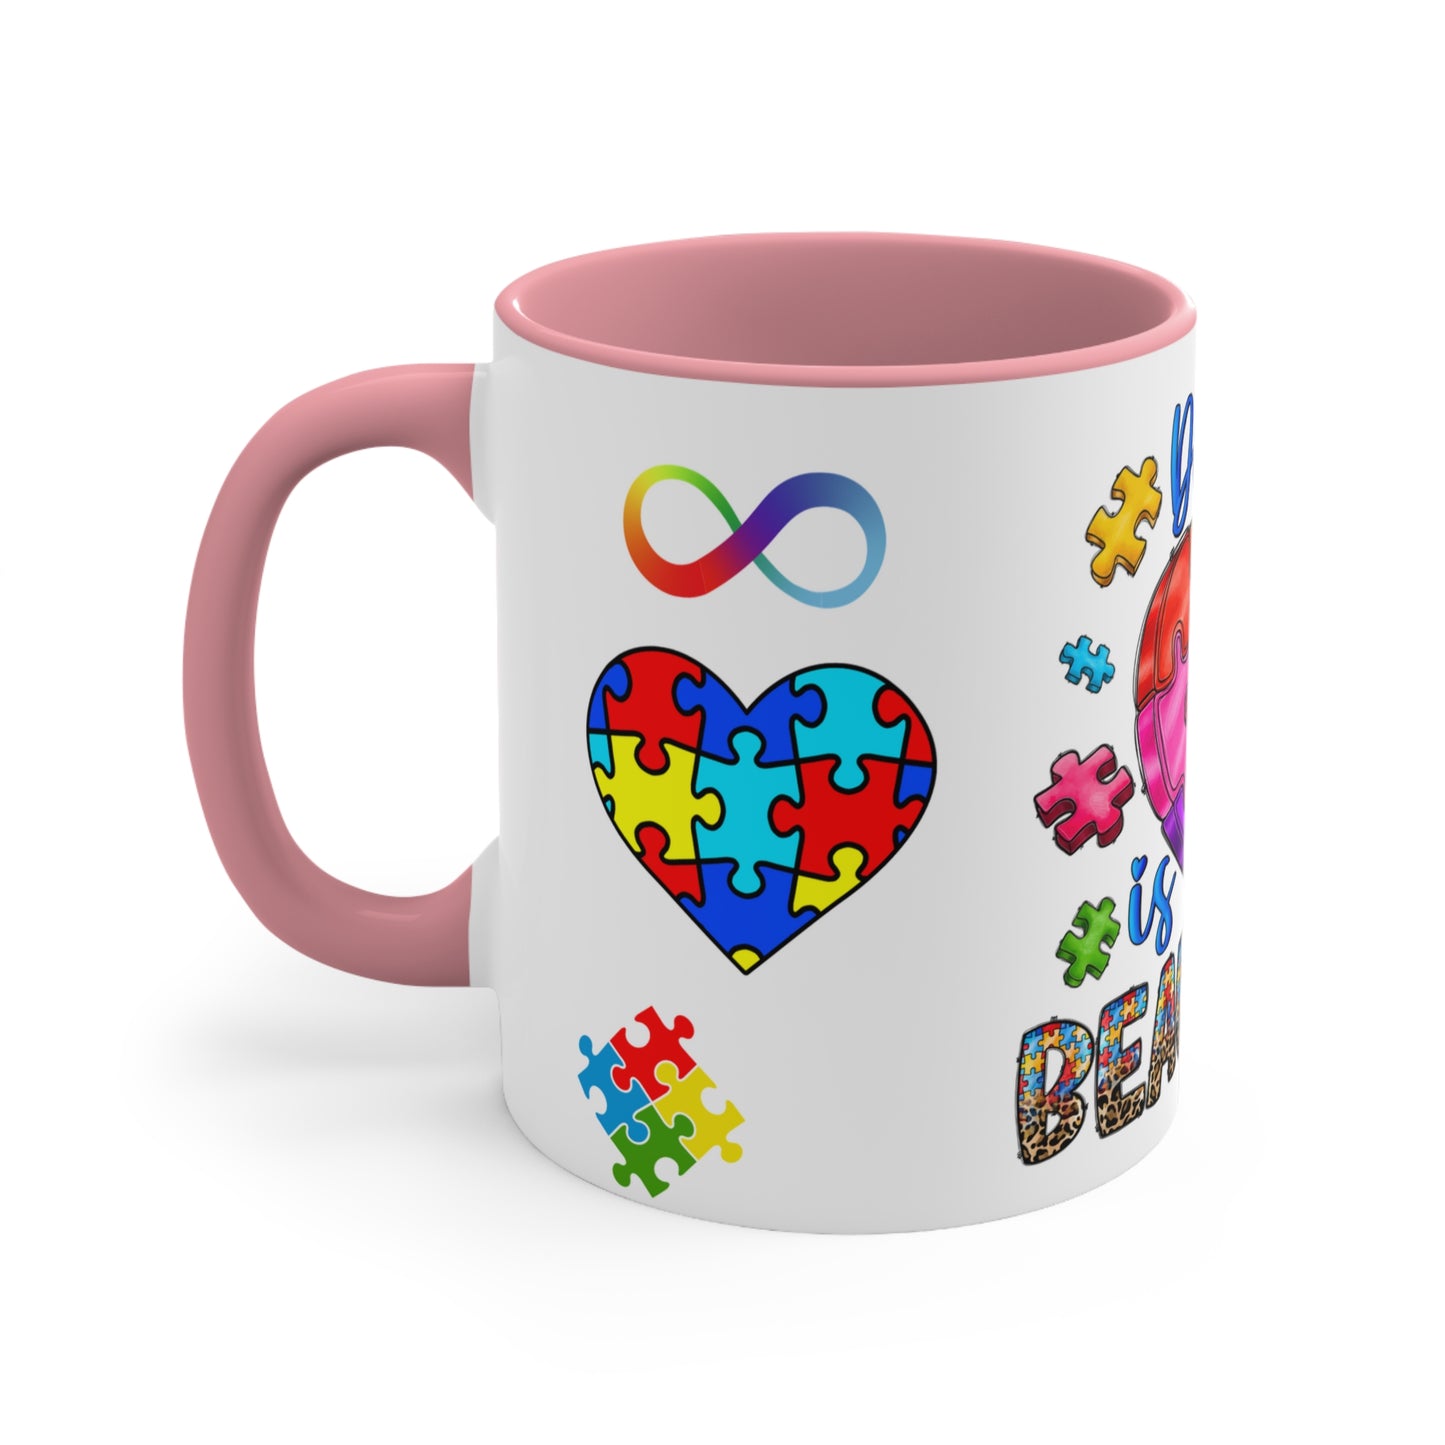 AUTISM MUG - Different is Beautiful - Mugscity - Free Shipping - Red-Blue-Navy-Black-Pink